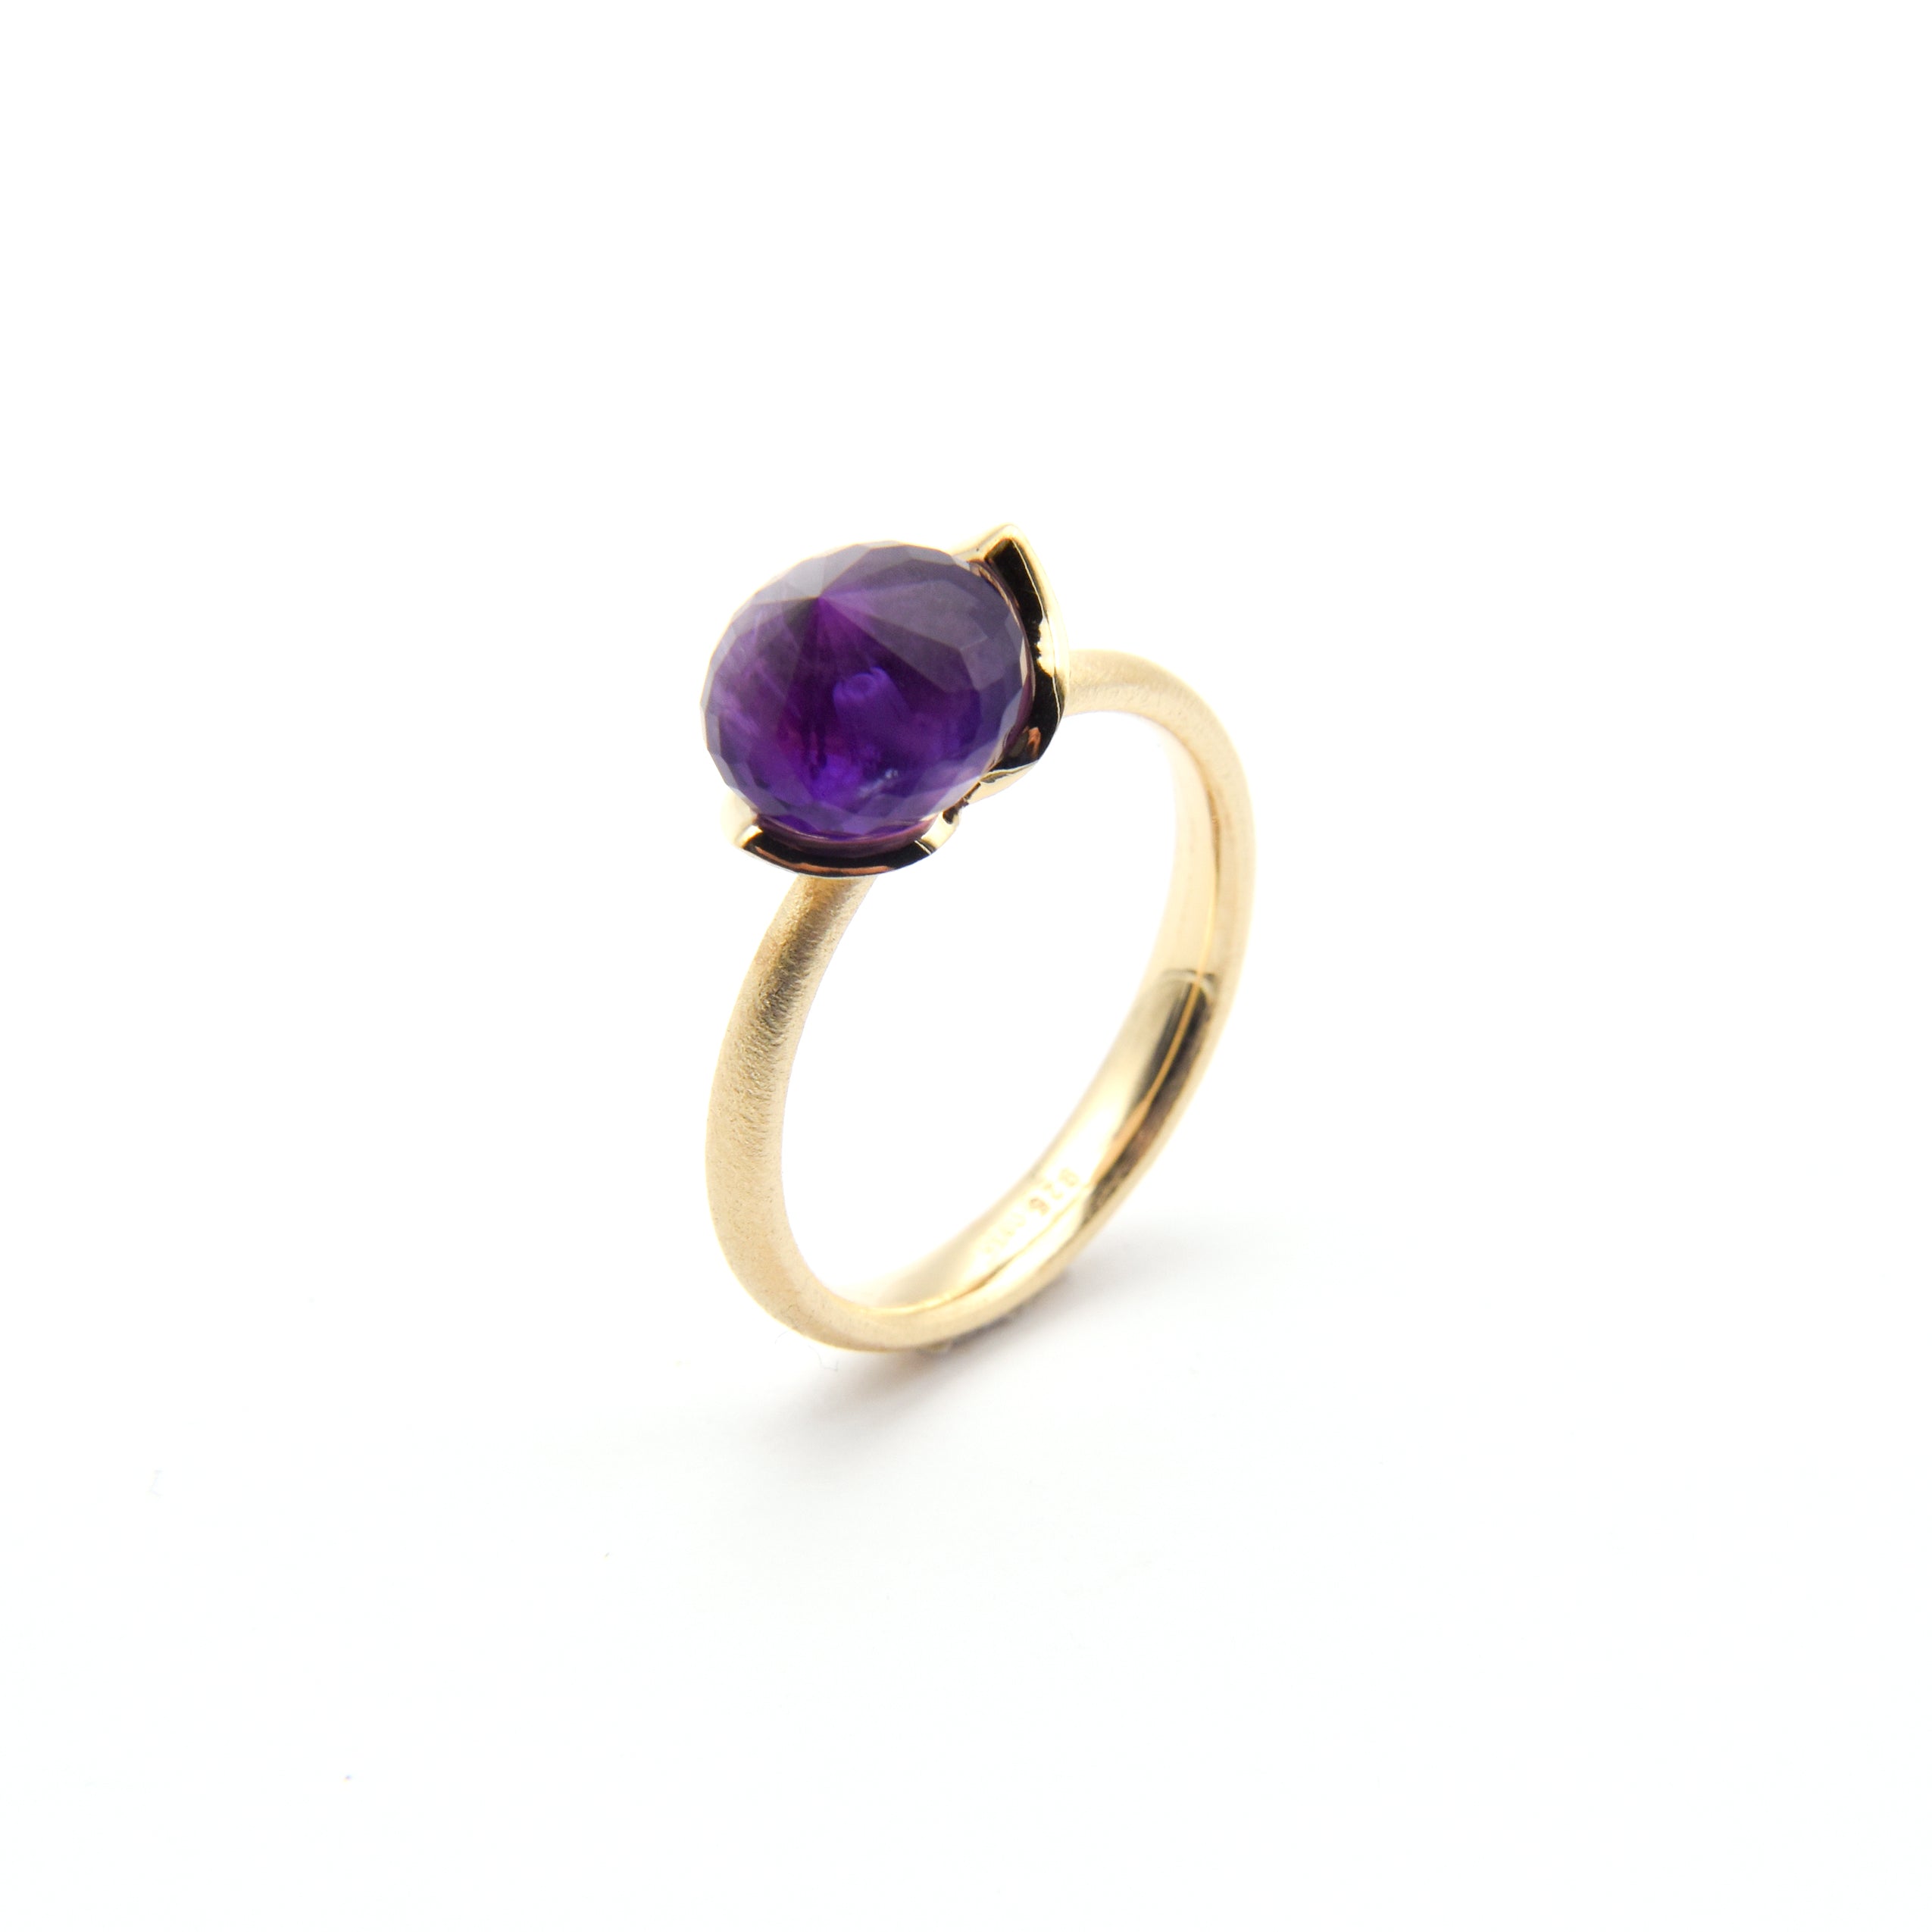 Dolce ring "smal" with amethyst 925/-